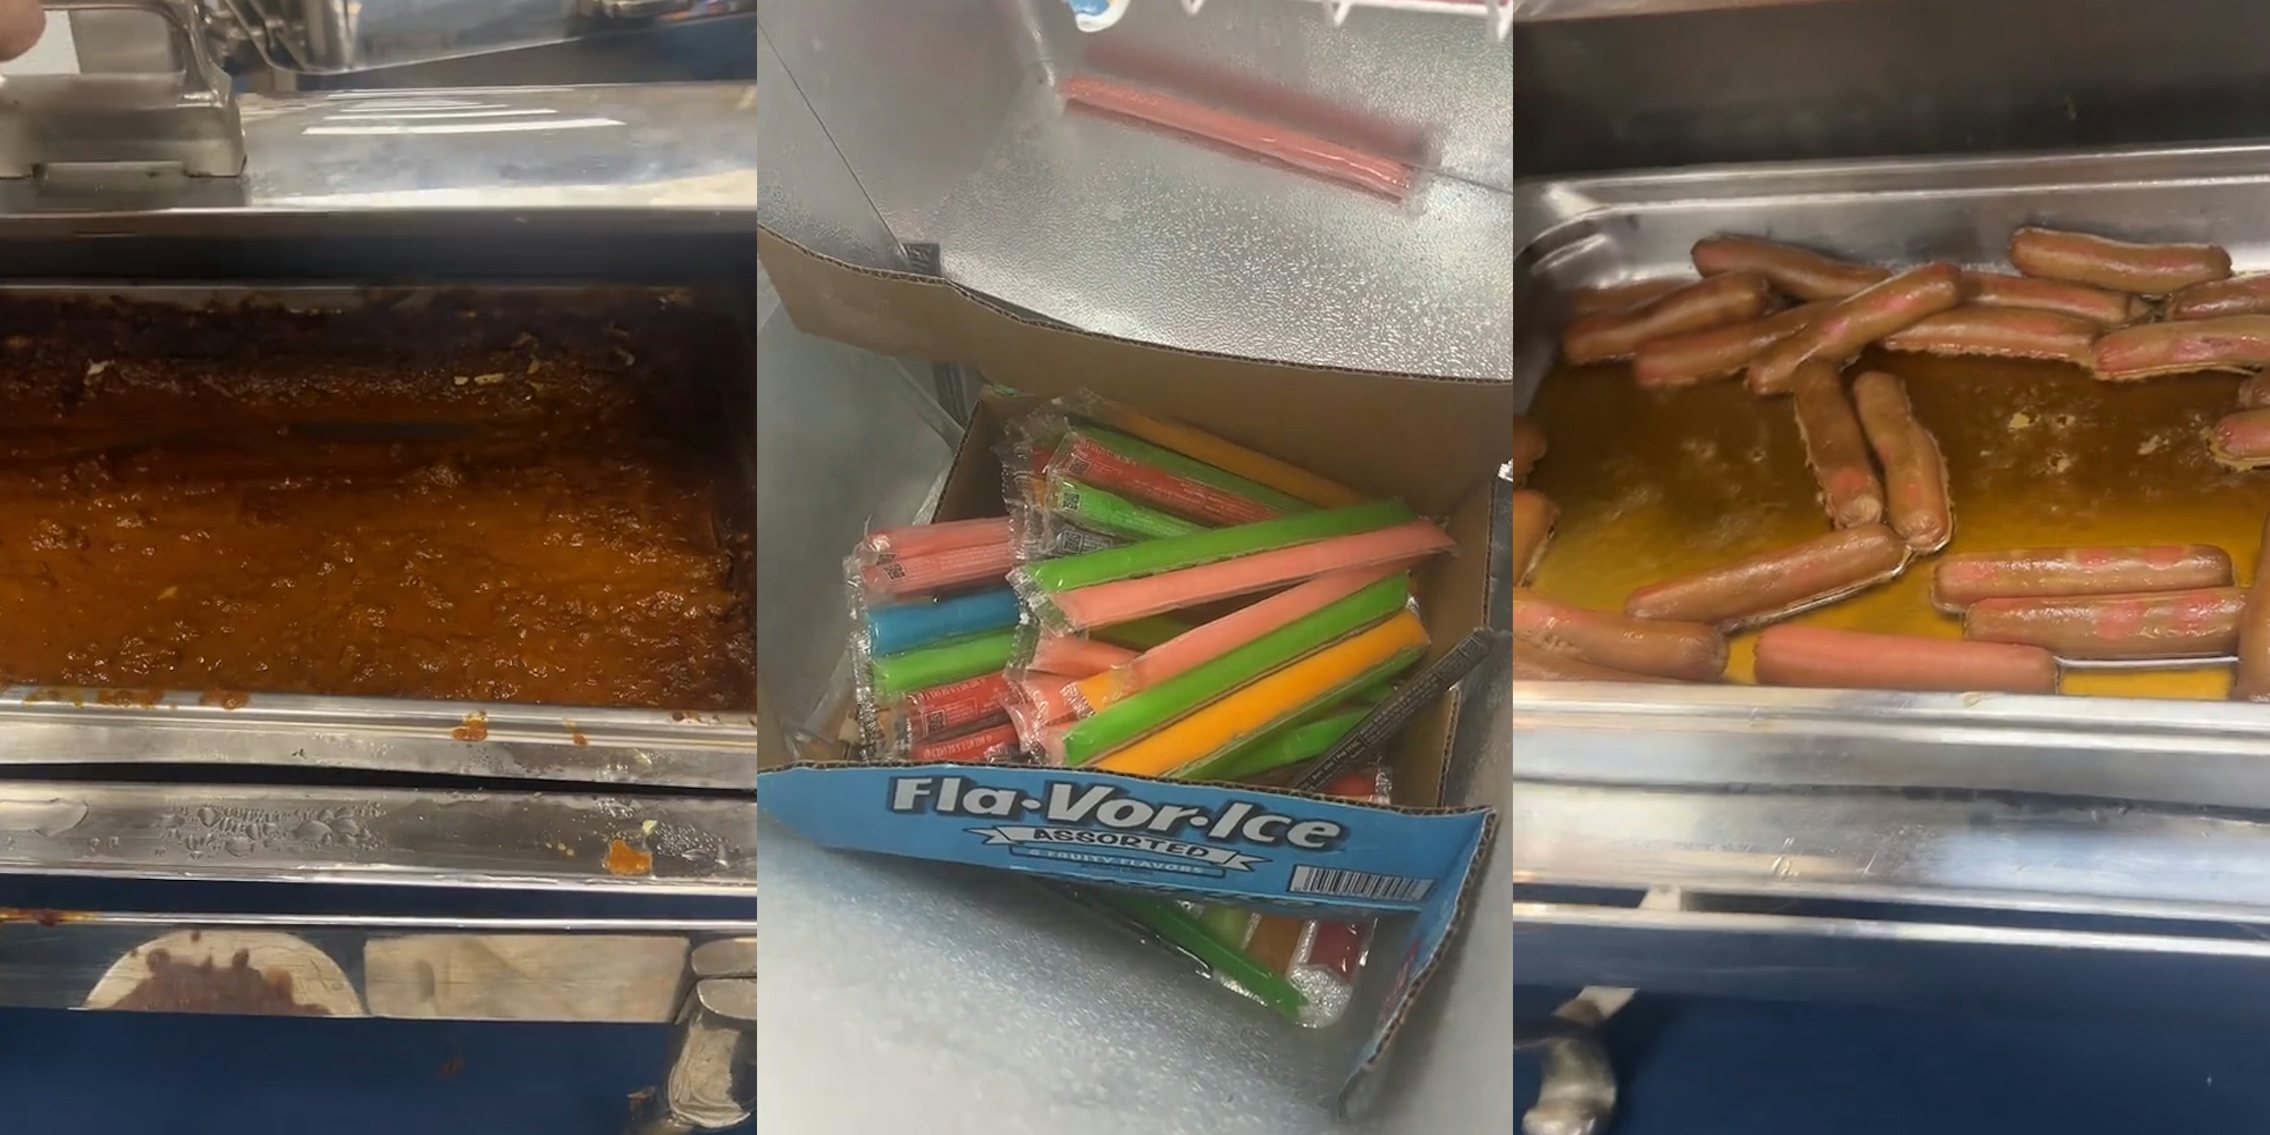 chili in metal container (l) ice pops in freezer (c) hot dogs in metal container (r)